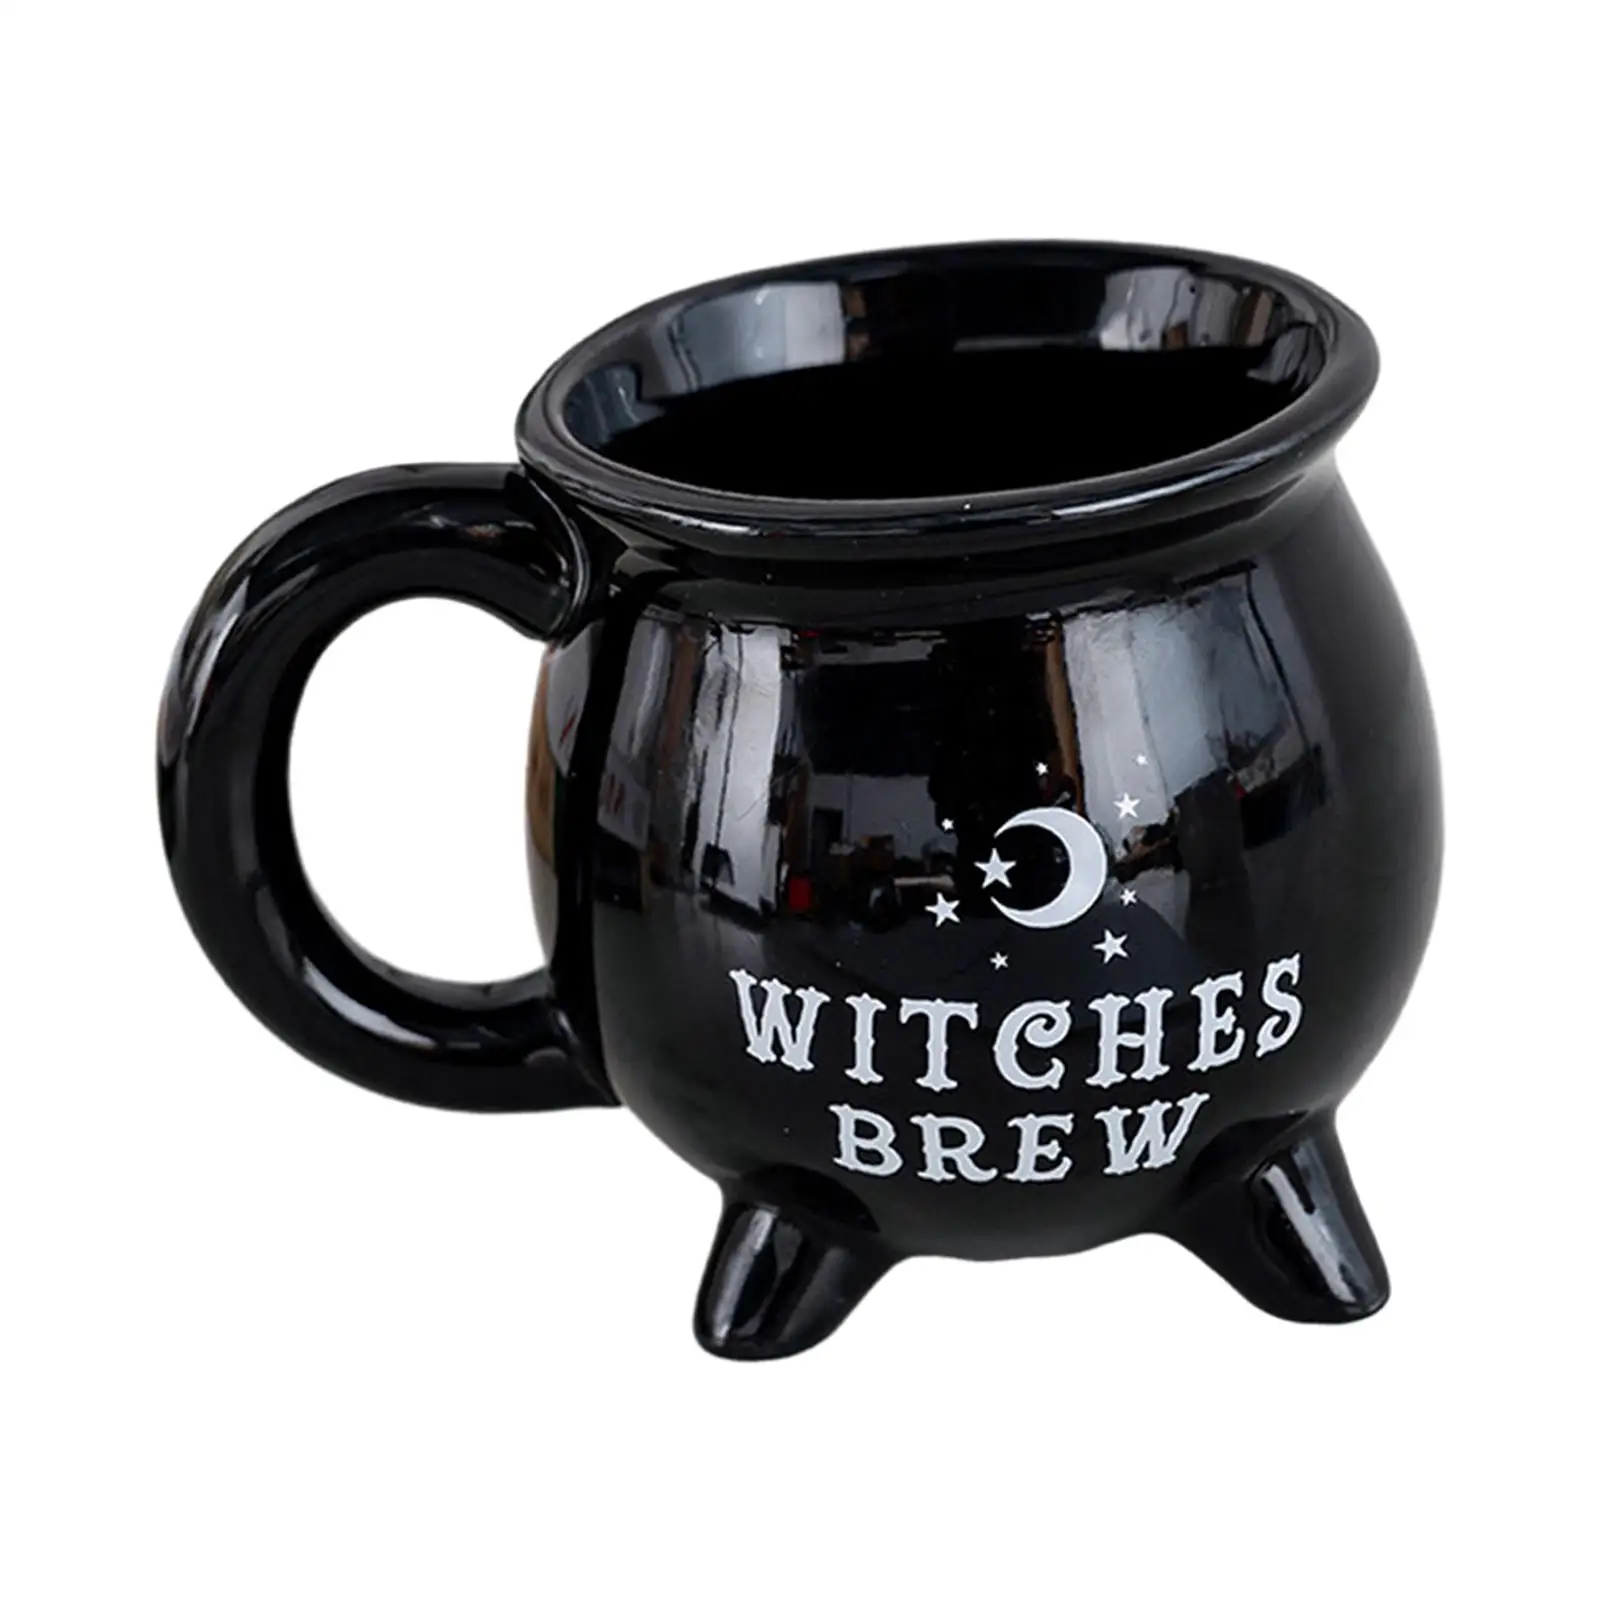 Halloween Coffee Mug Porcelain 3D Novelty Gothic Cup Witch Ceramic Mug for Candy Chocolate Halloween Milk